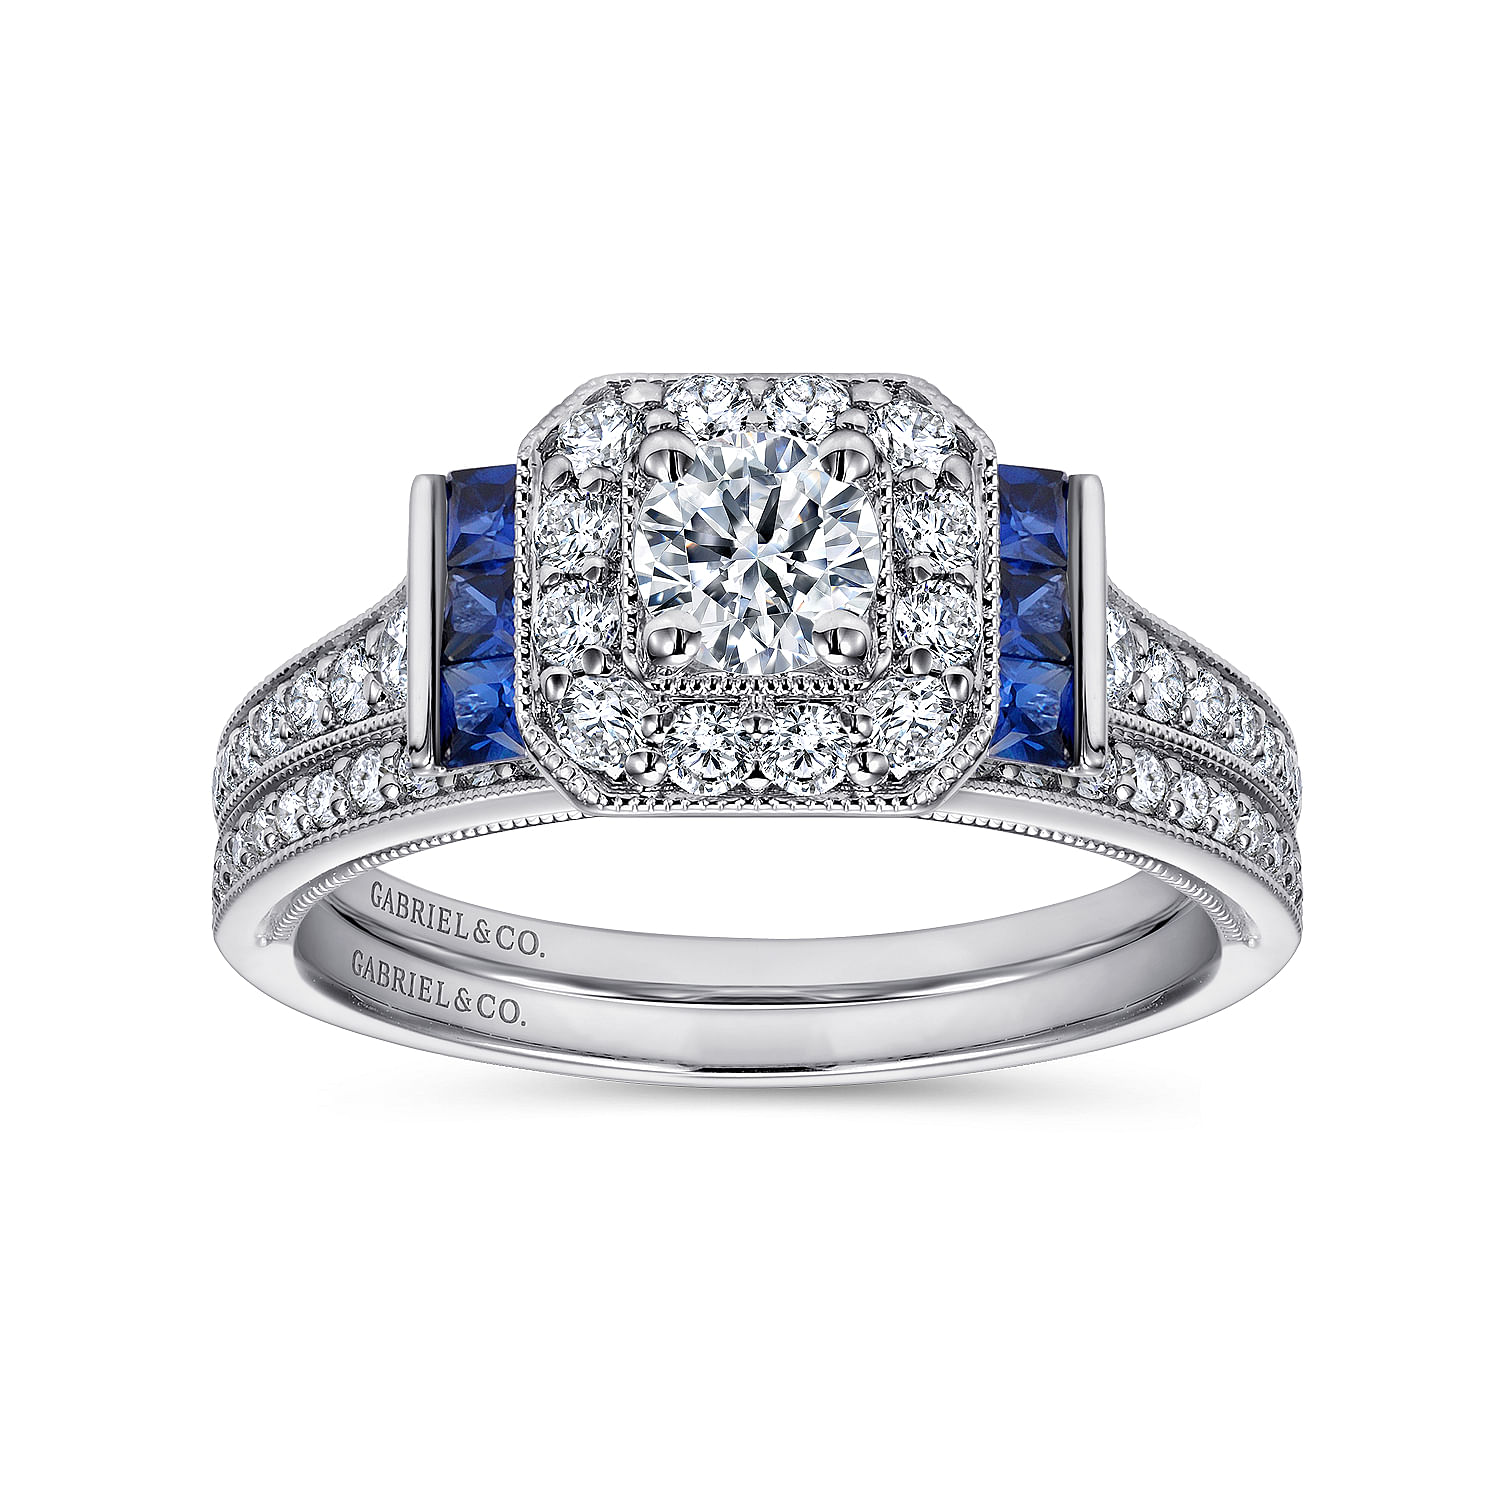 Vintage Inspired 14K White Gold Round Halo Sapphire and Diamond Channel Set Engagement Ring